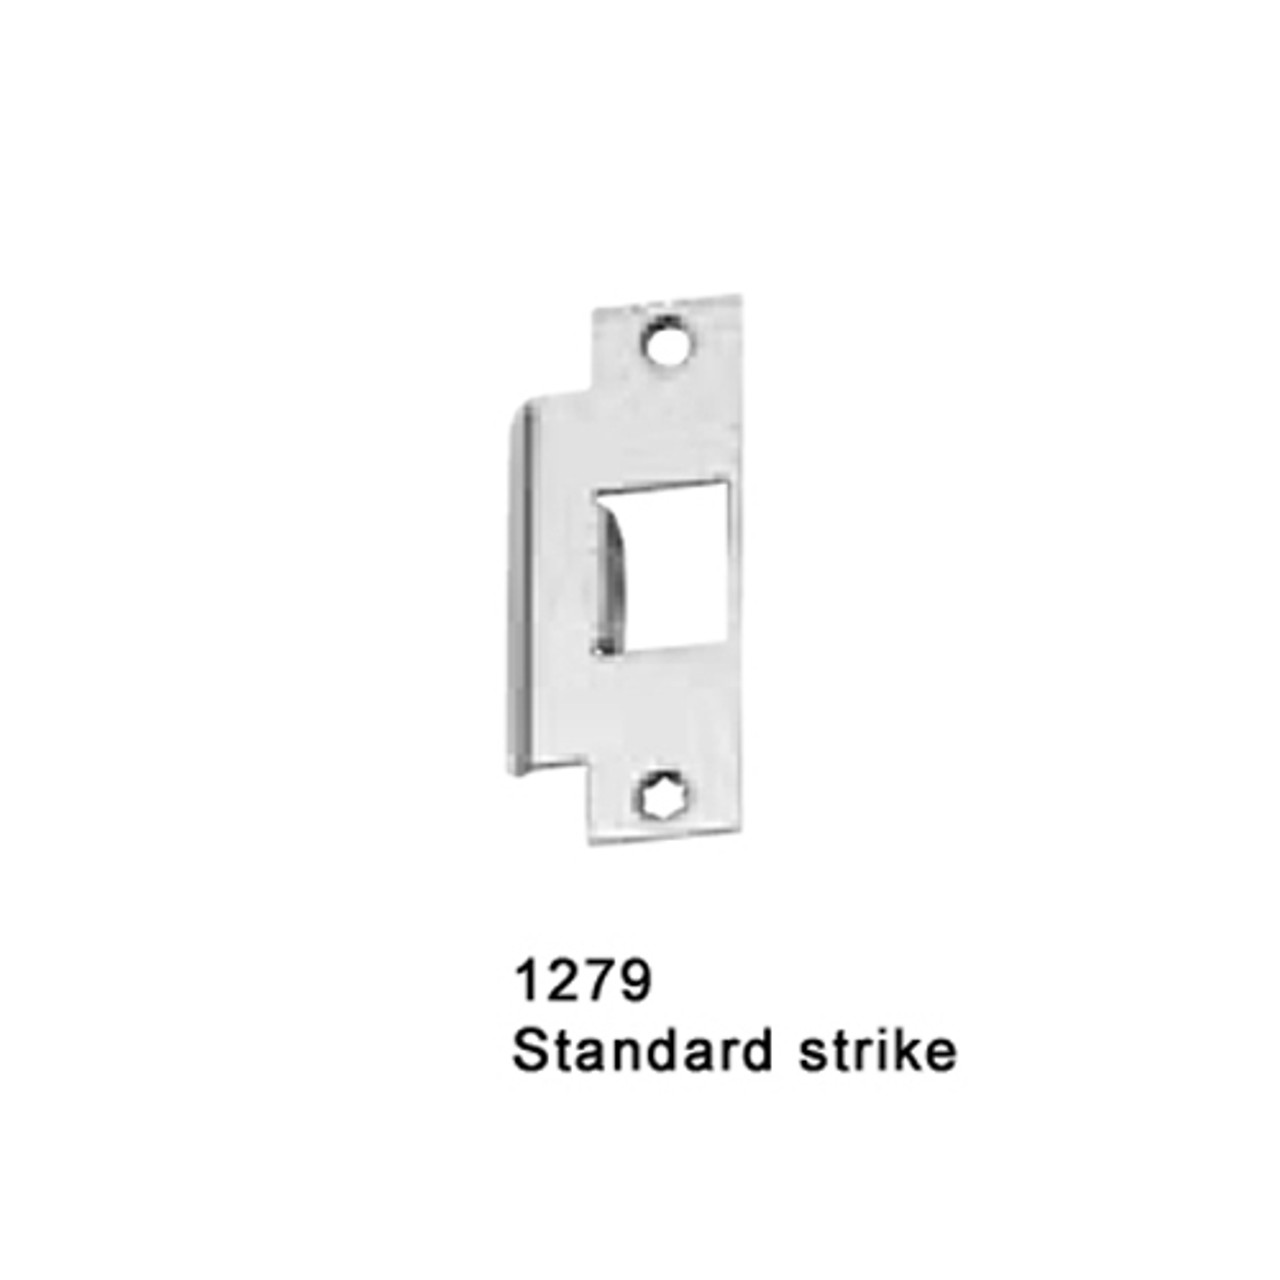 CD25-M-EO-US28-3-RHR Falcon 25 Series Exit Only Mortise Lock Devices in Anodized Aluminum